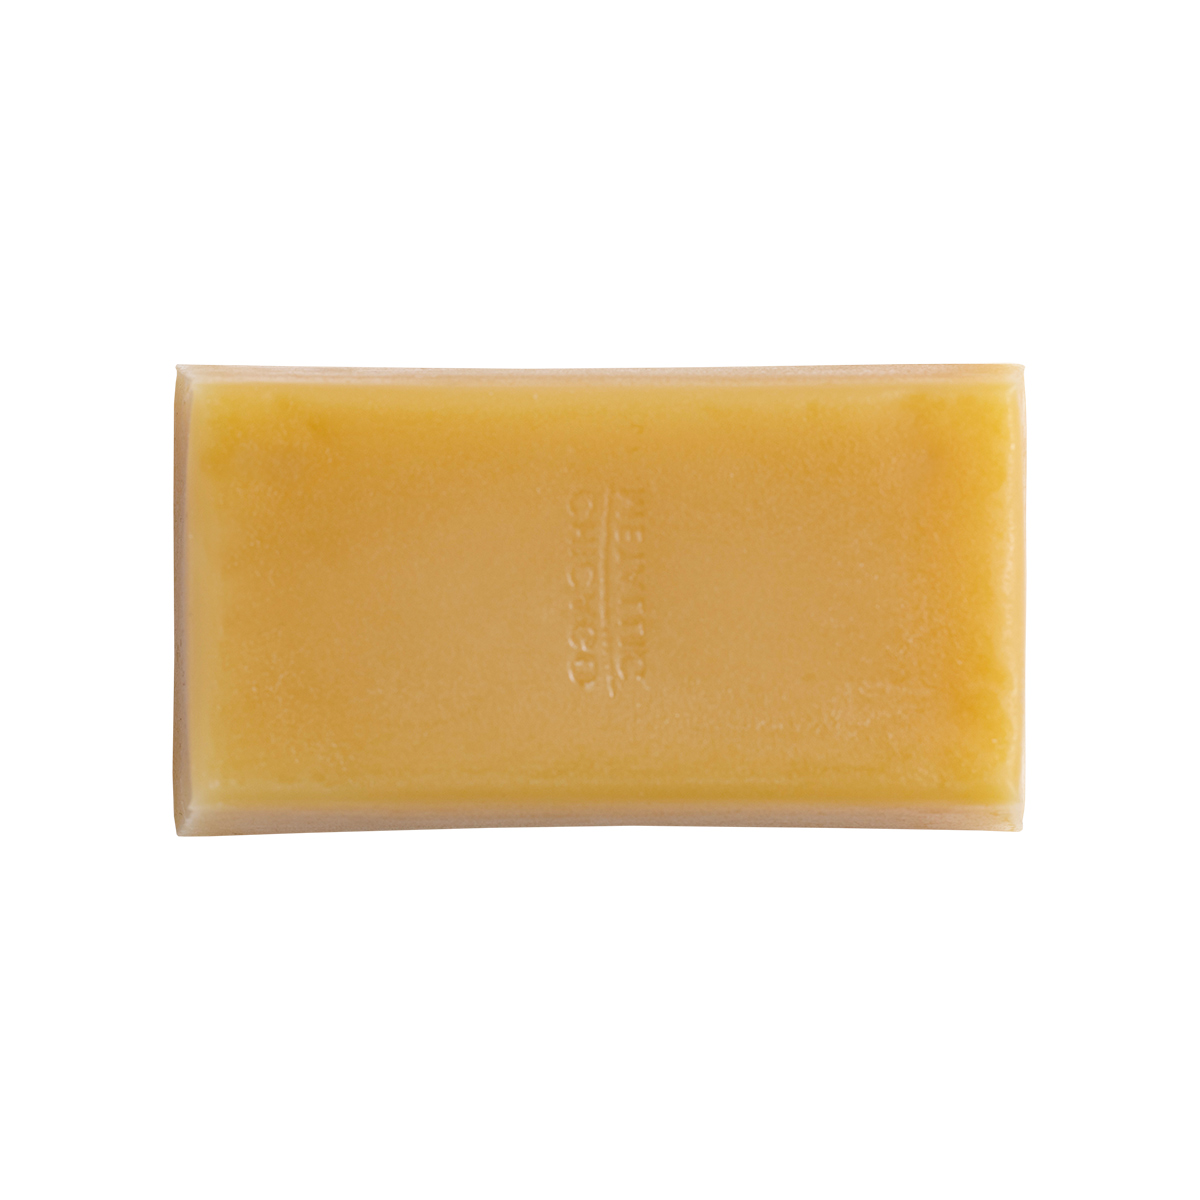 The Beeswax Co. 1 LB Pure Texas Beeswax Food Grade Cosmetic Grade All  Natural Texas Beeswx (1) 1 Pound (Pack of 1)